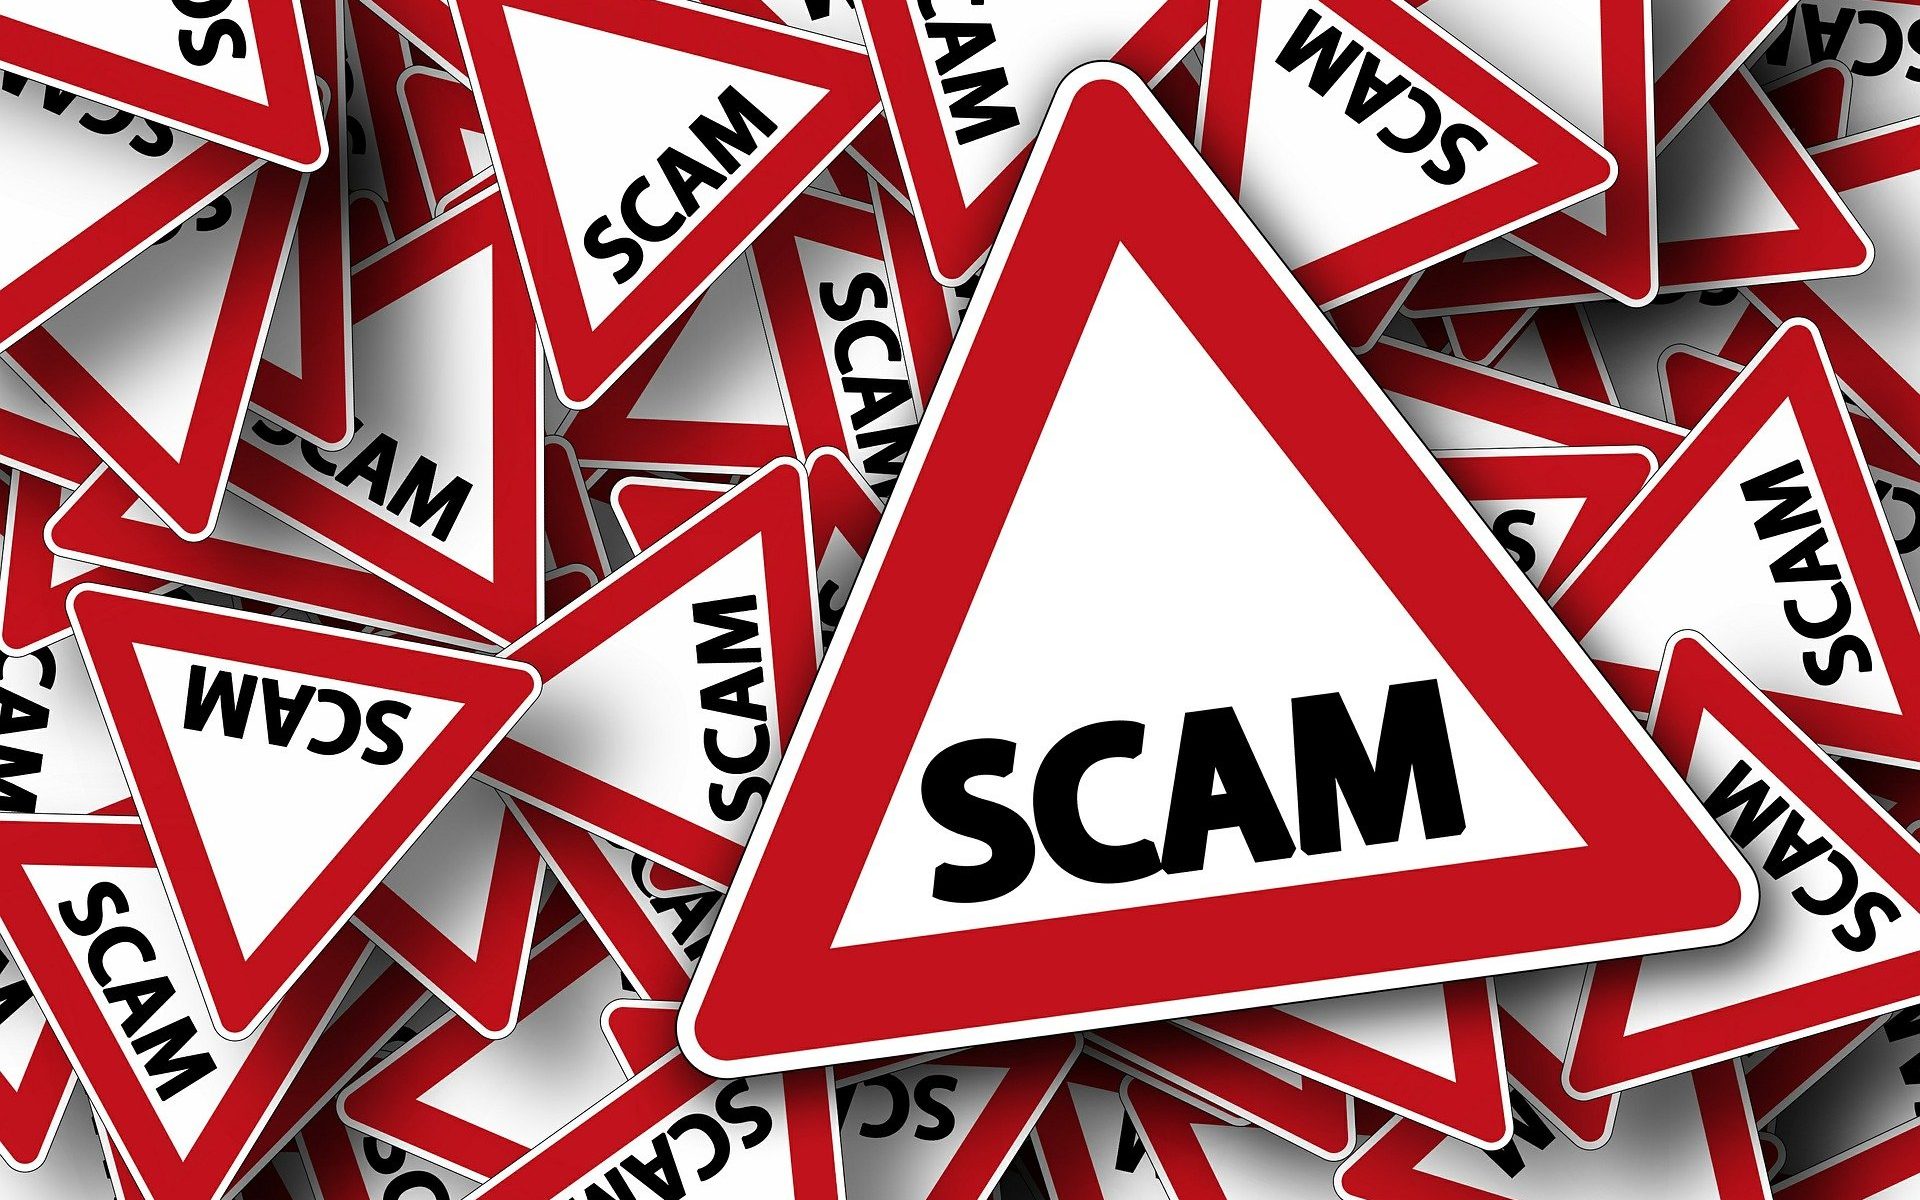 Signs with the word "scam" on each